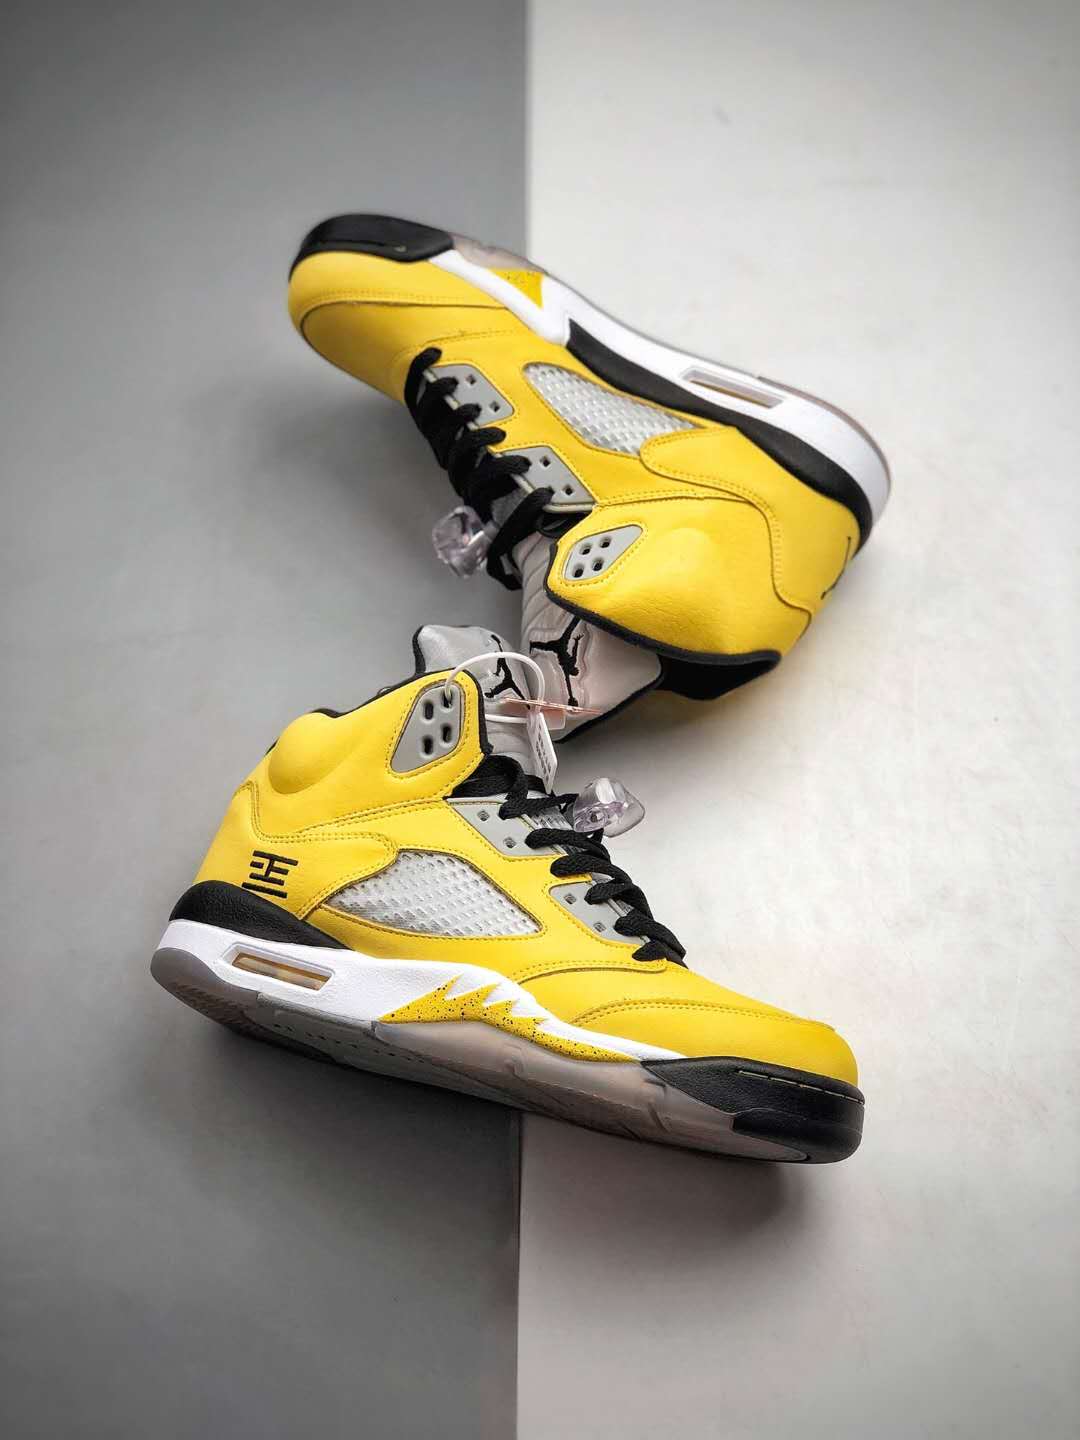 Air Jordan 5 Retro T23 'Tokyo' 454783-701 – Limited Edition Sneakers for Authentic Style